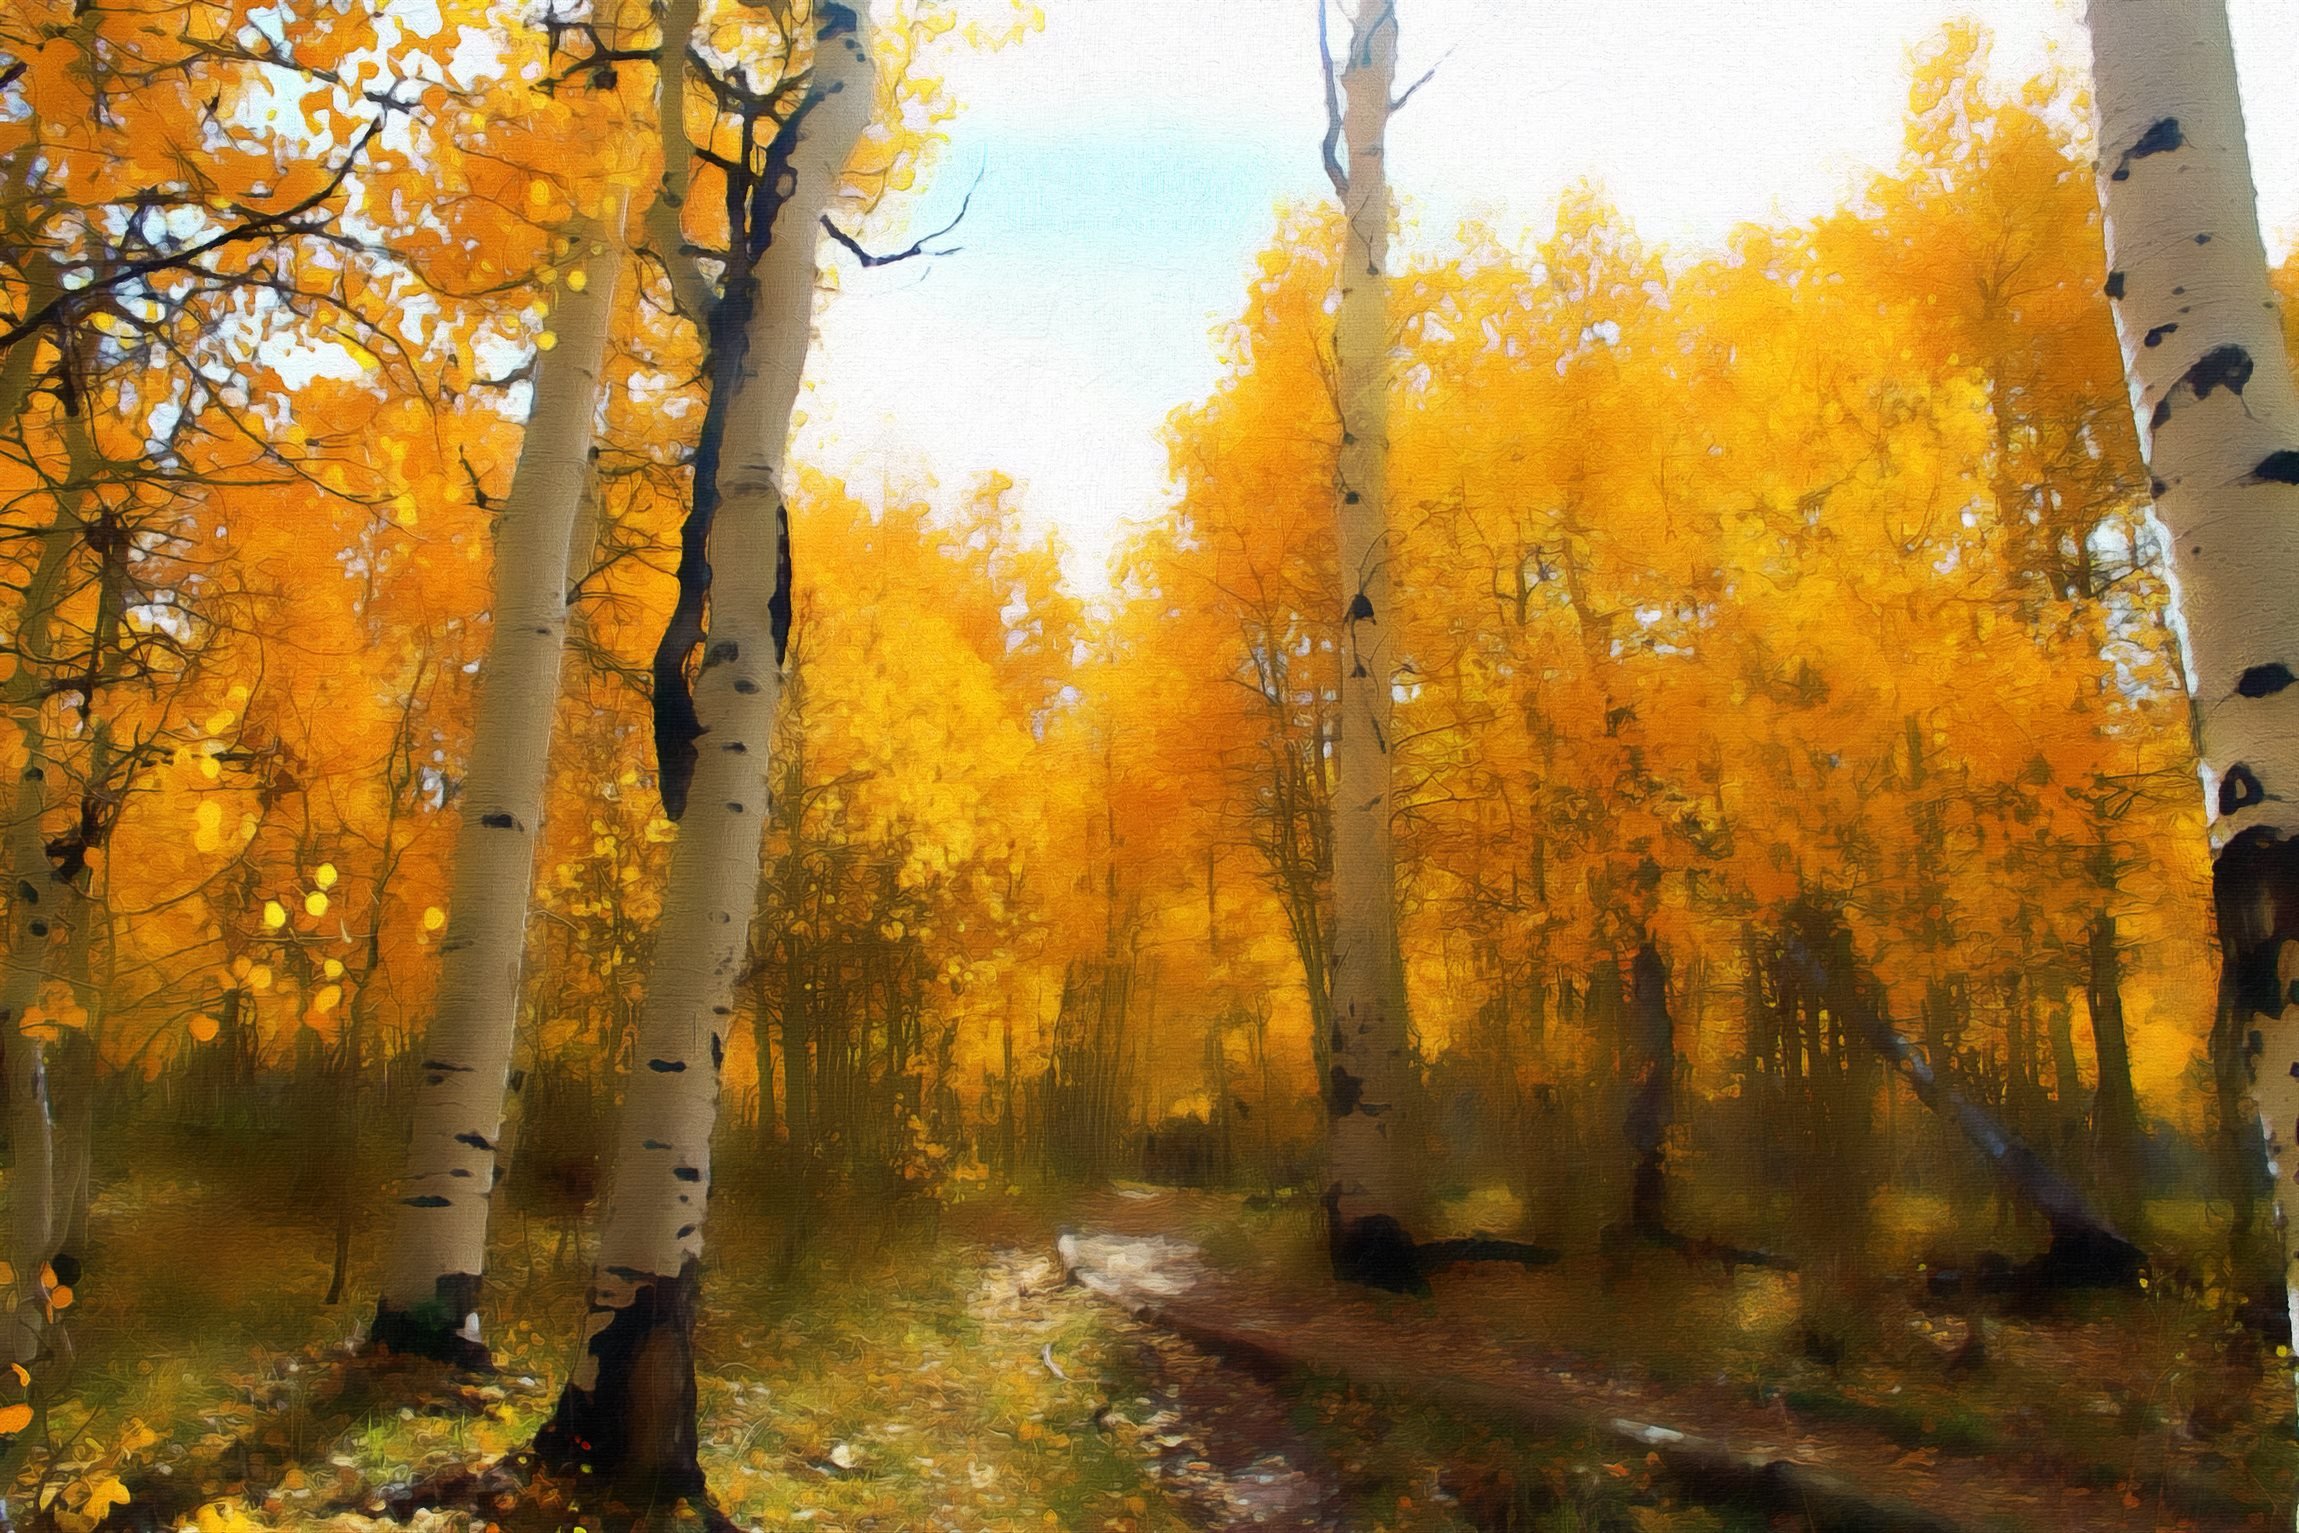 Oil Paint Photoshop Action - example 14 with yellow forest.